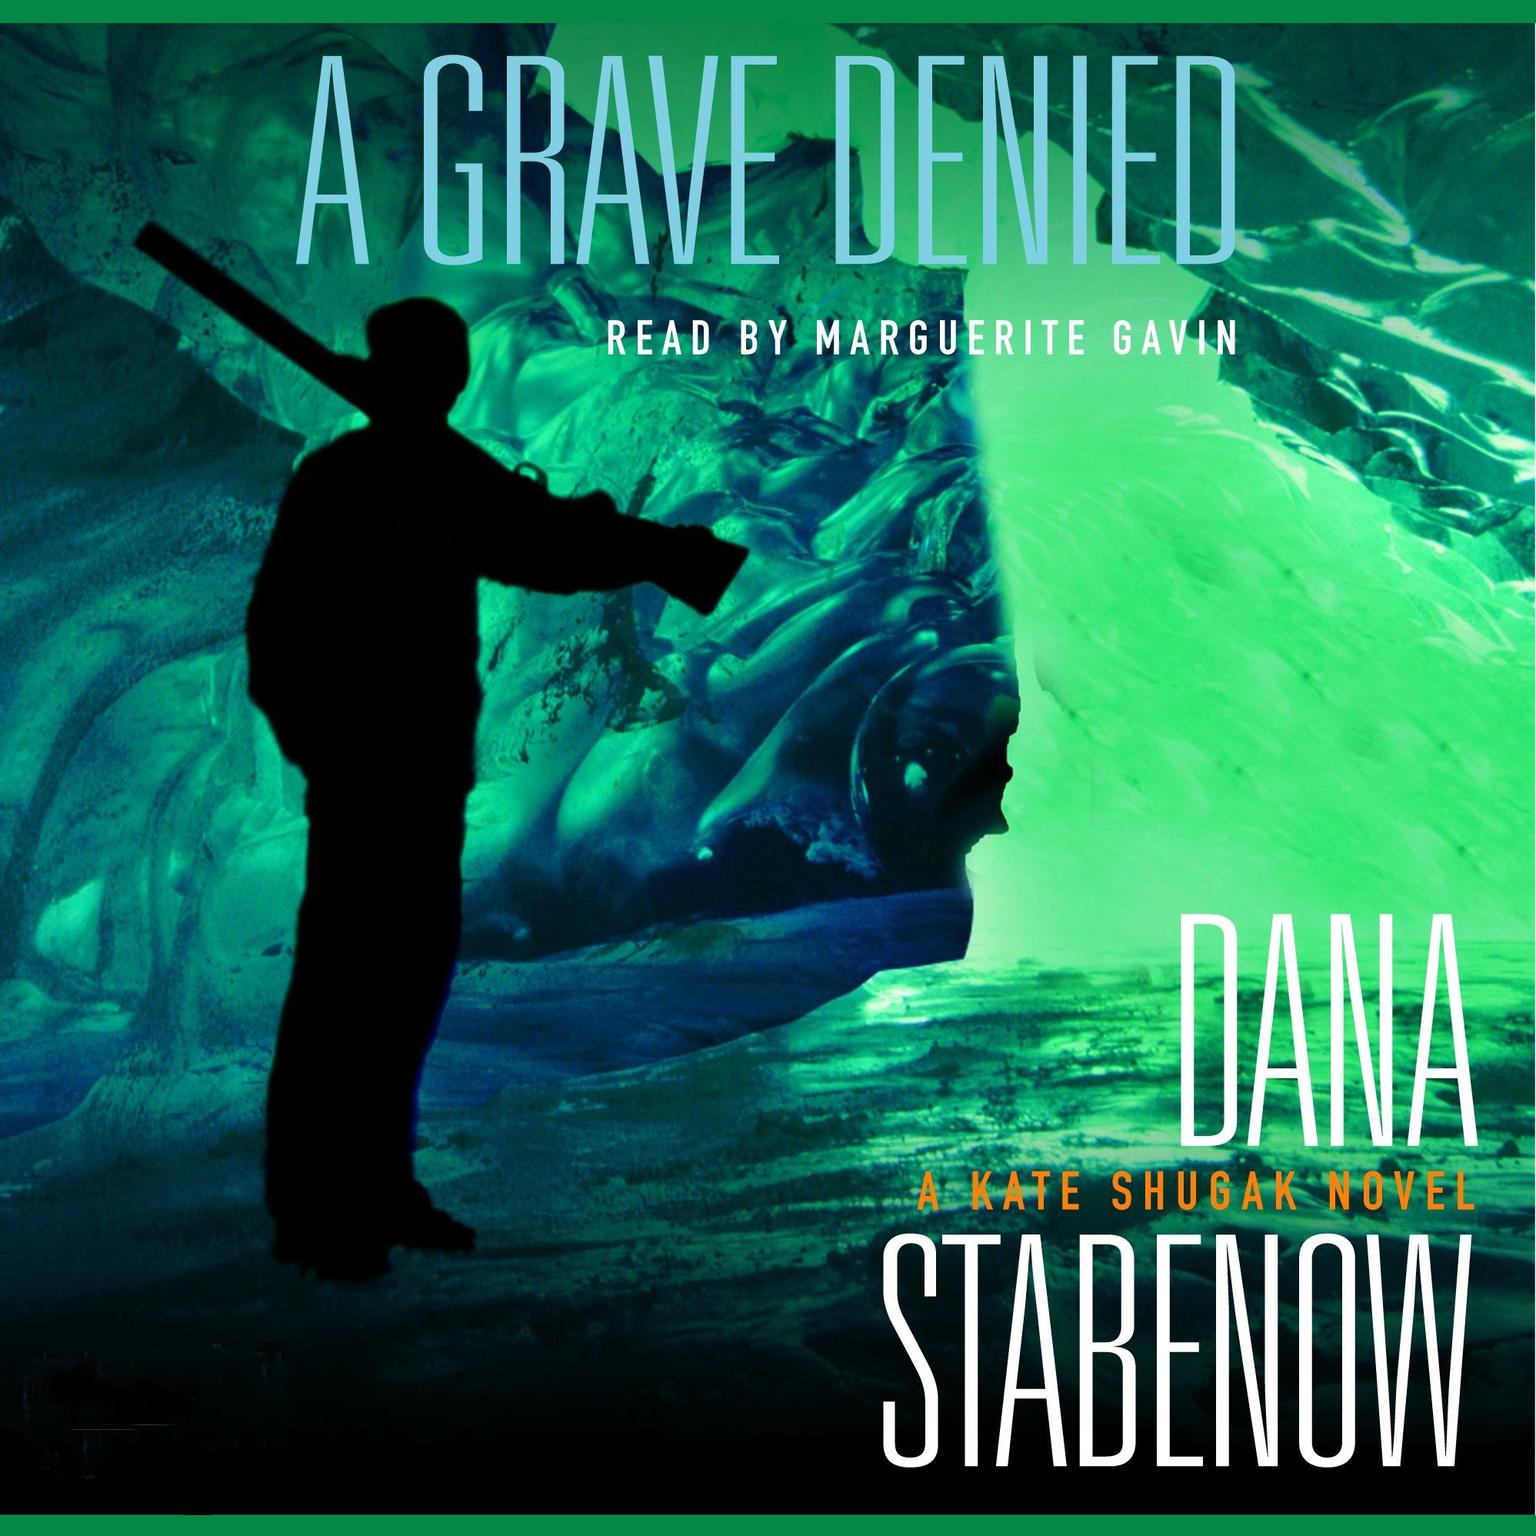 A Grave Denied Audiobook, by Dana Stabenow